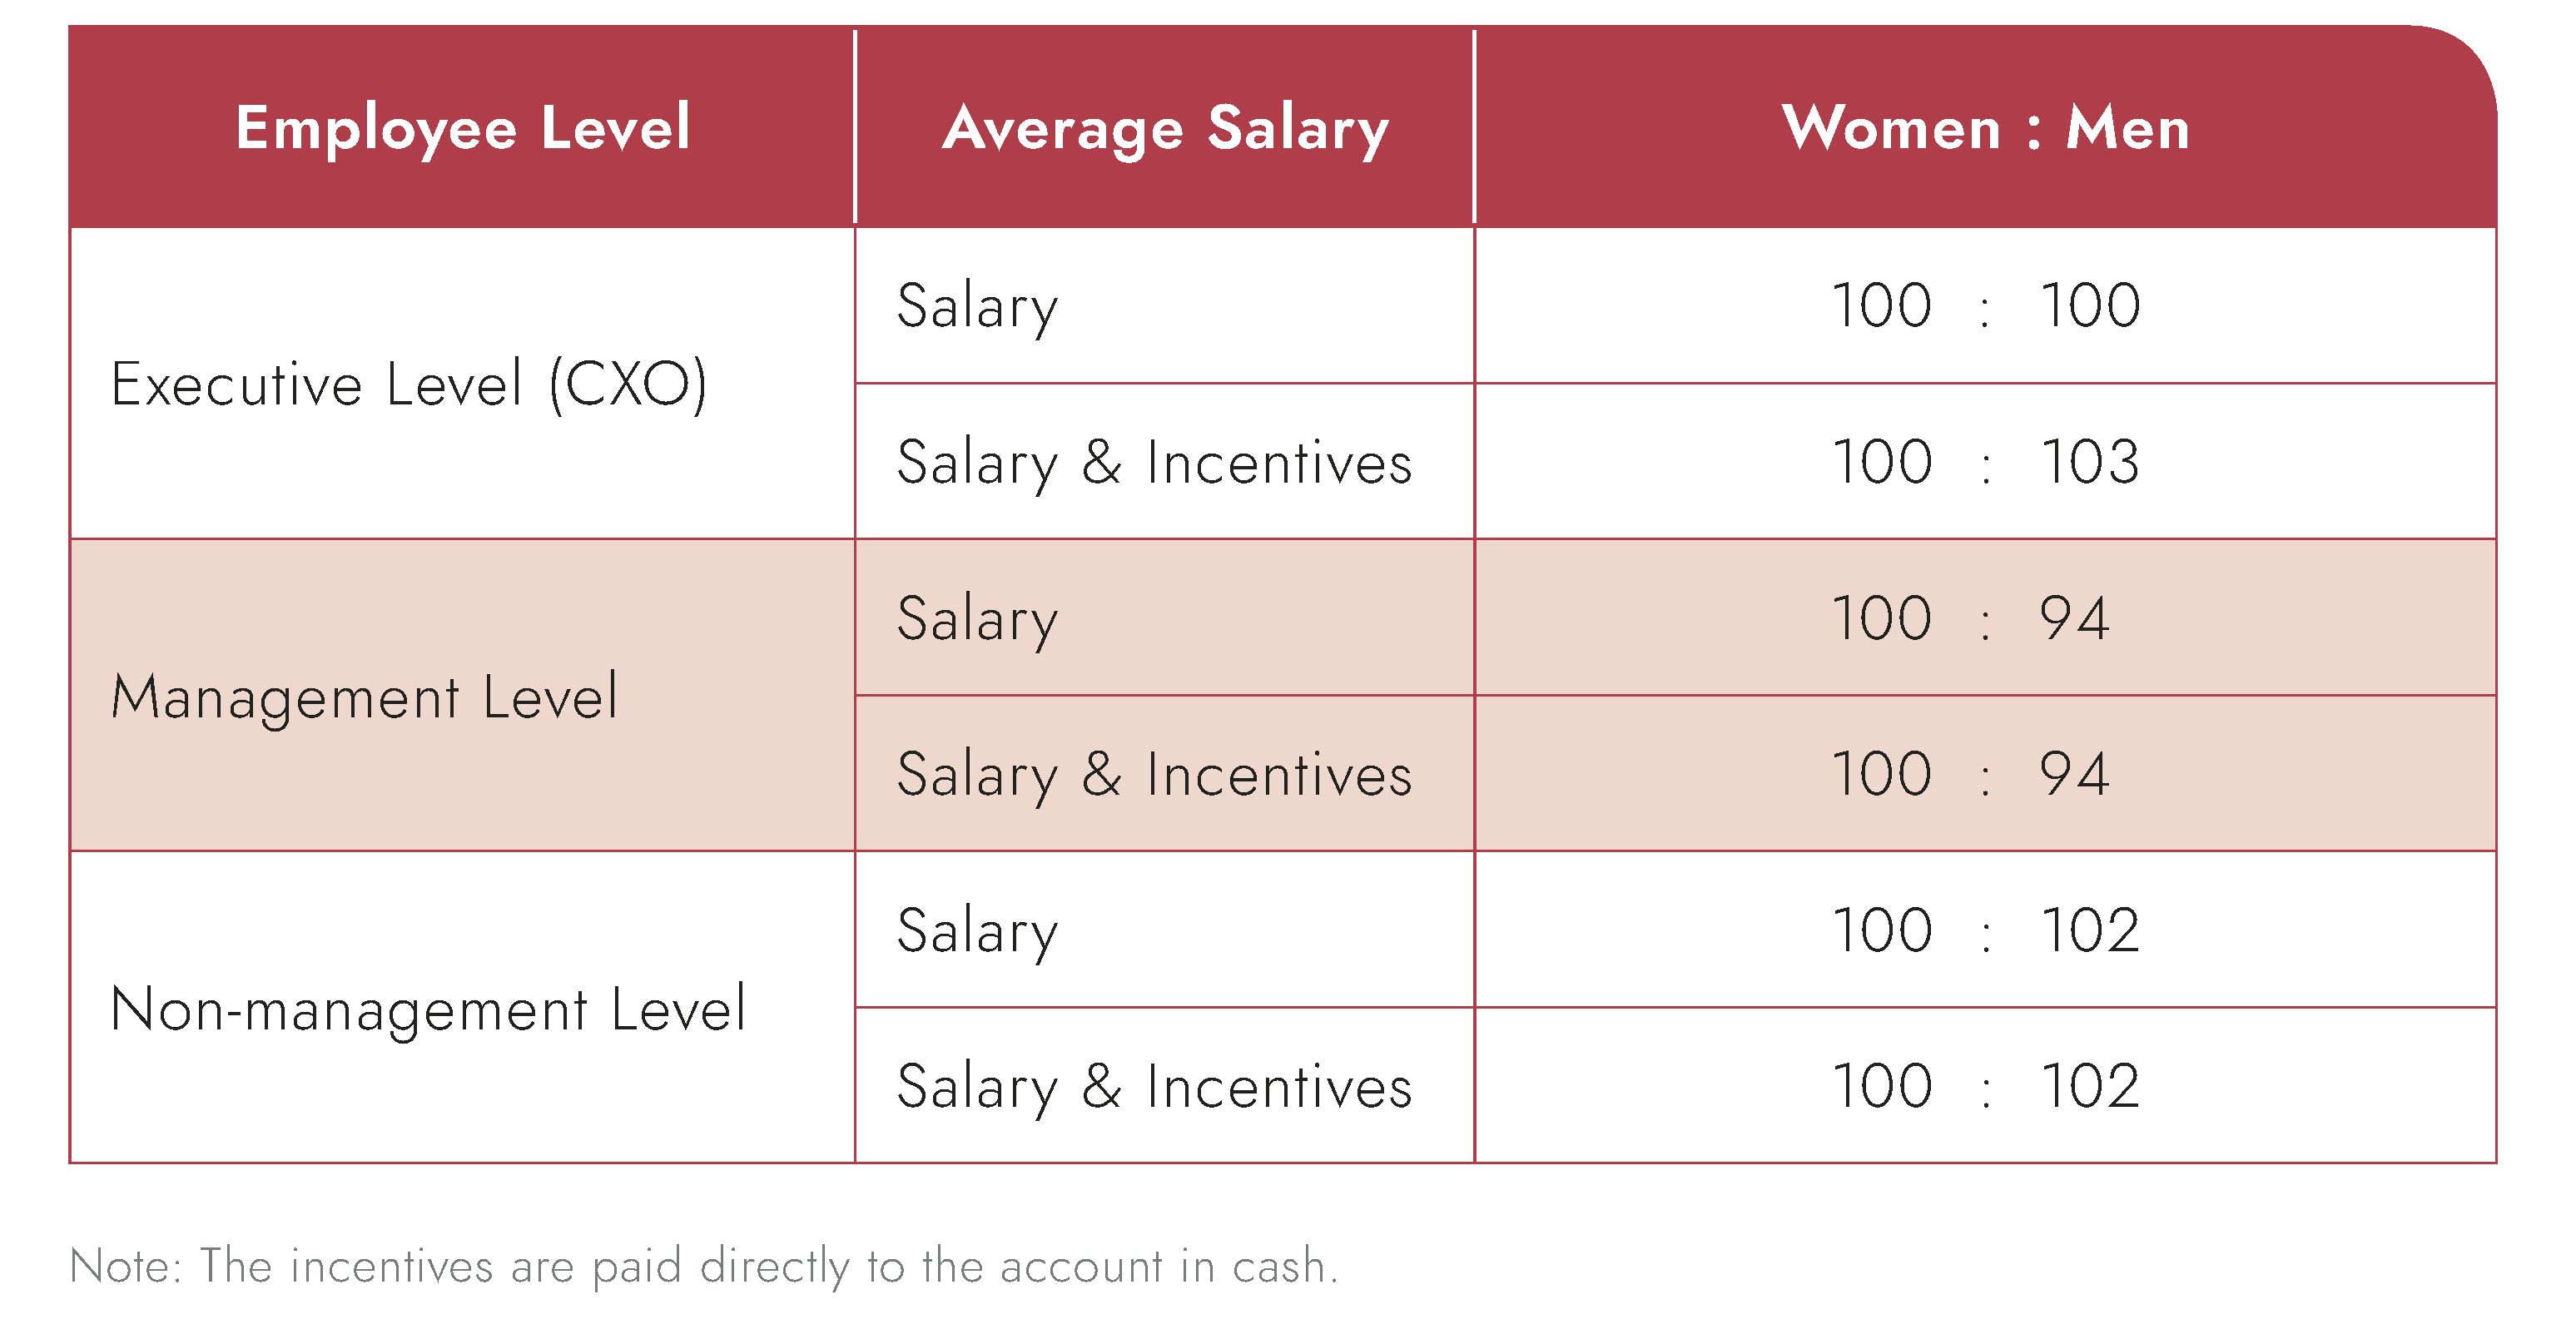 Equal Pay of every Employee Level